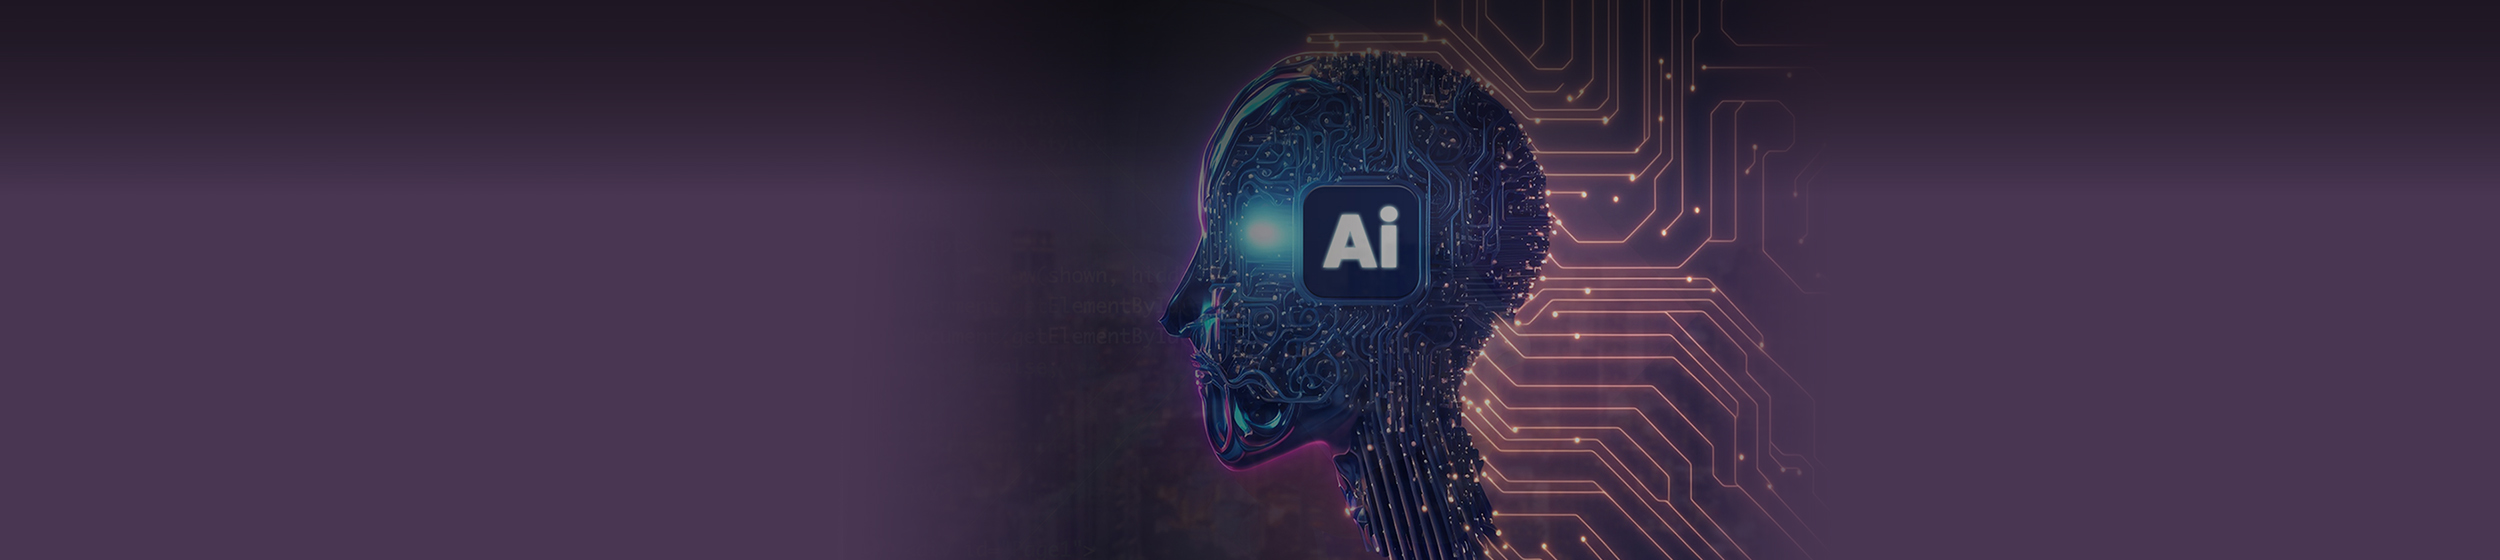 Banner-Technologies Powering AI Tools and Breakthrough Use Cases Across Industries